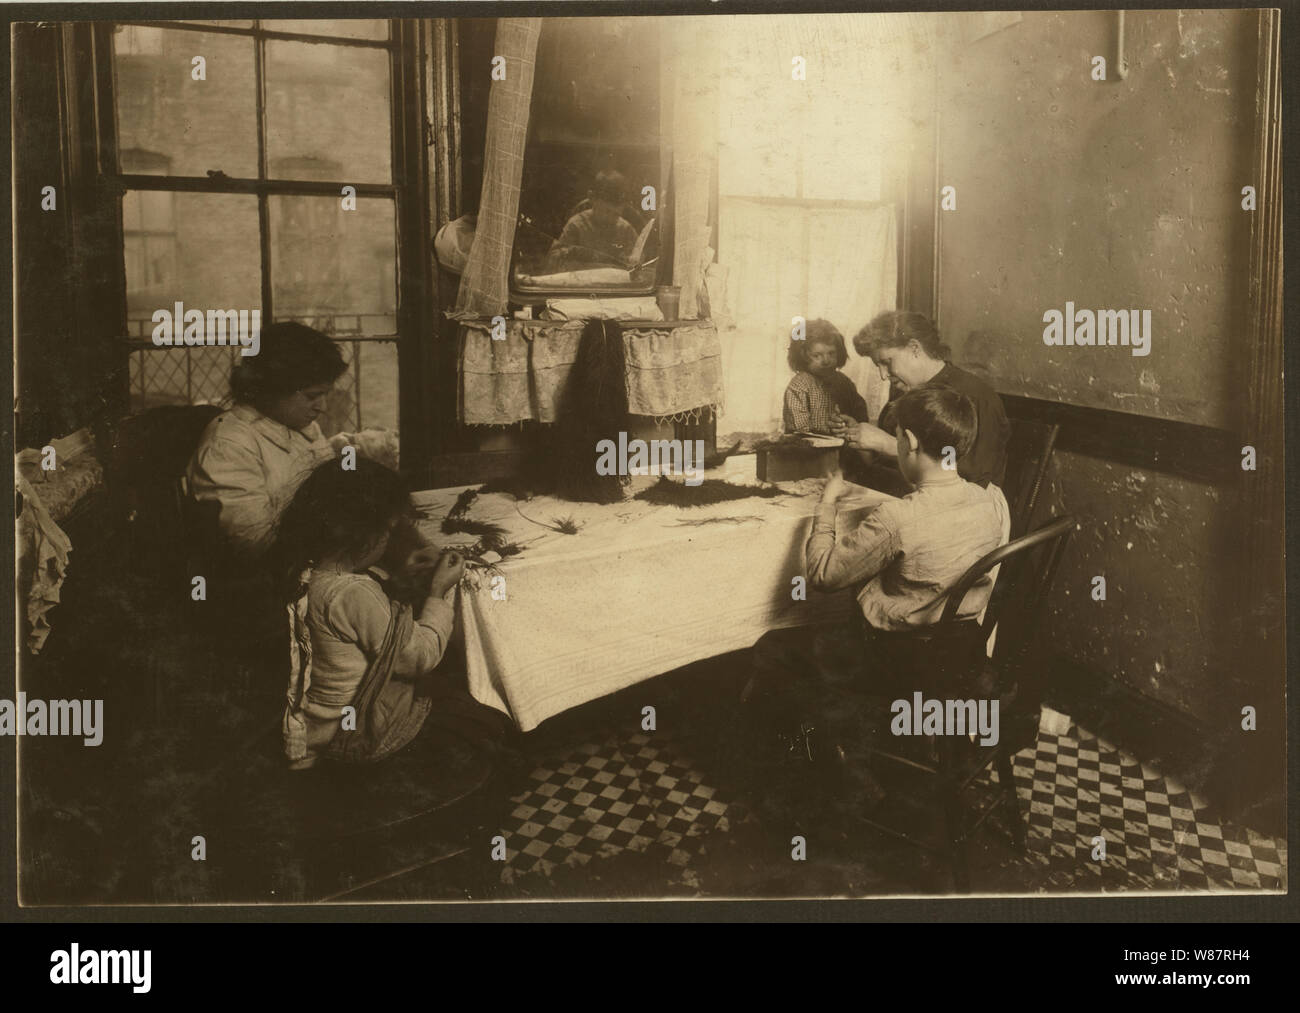 5 P.M. Mrs. Mary Molinari and family, 304 E. 107th St. We made feathers some, but not much. Six-year-old Antoinette ties like an old hand. Dominick, 9 years old, works some. Annie 9, the oldest girl, works in a shirt-waist factory. Father is a hod carrier. Stock Photo